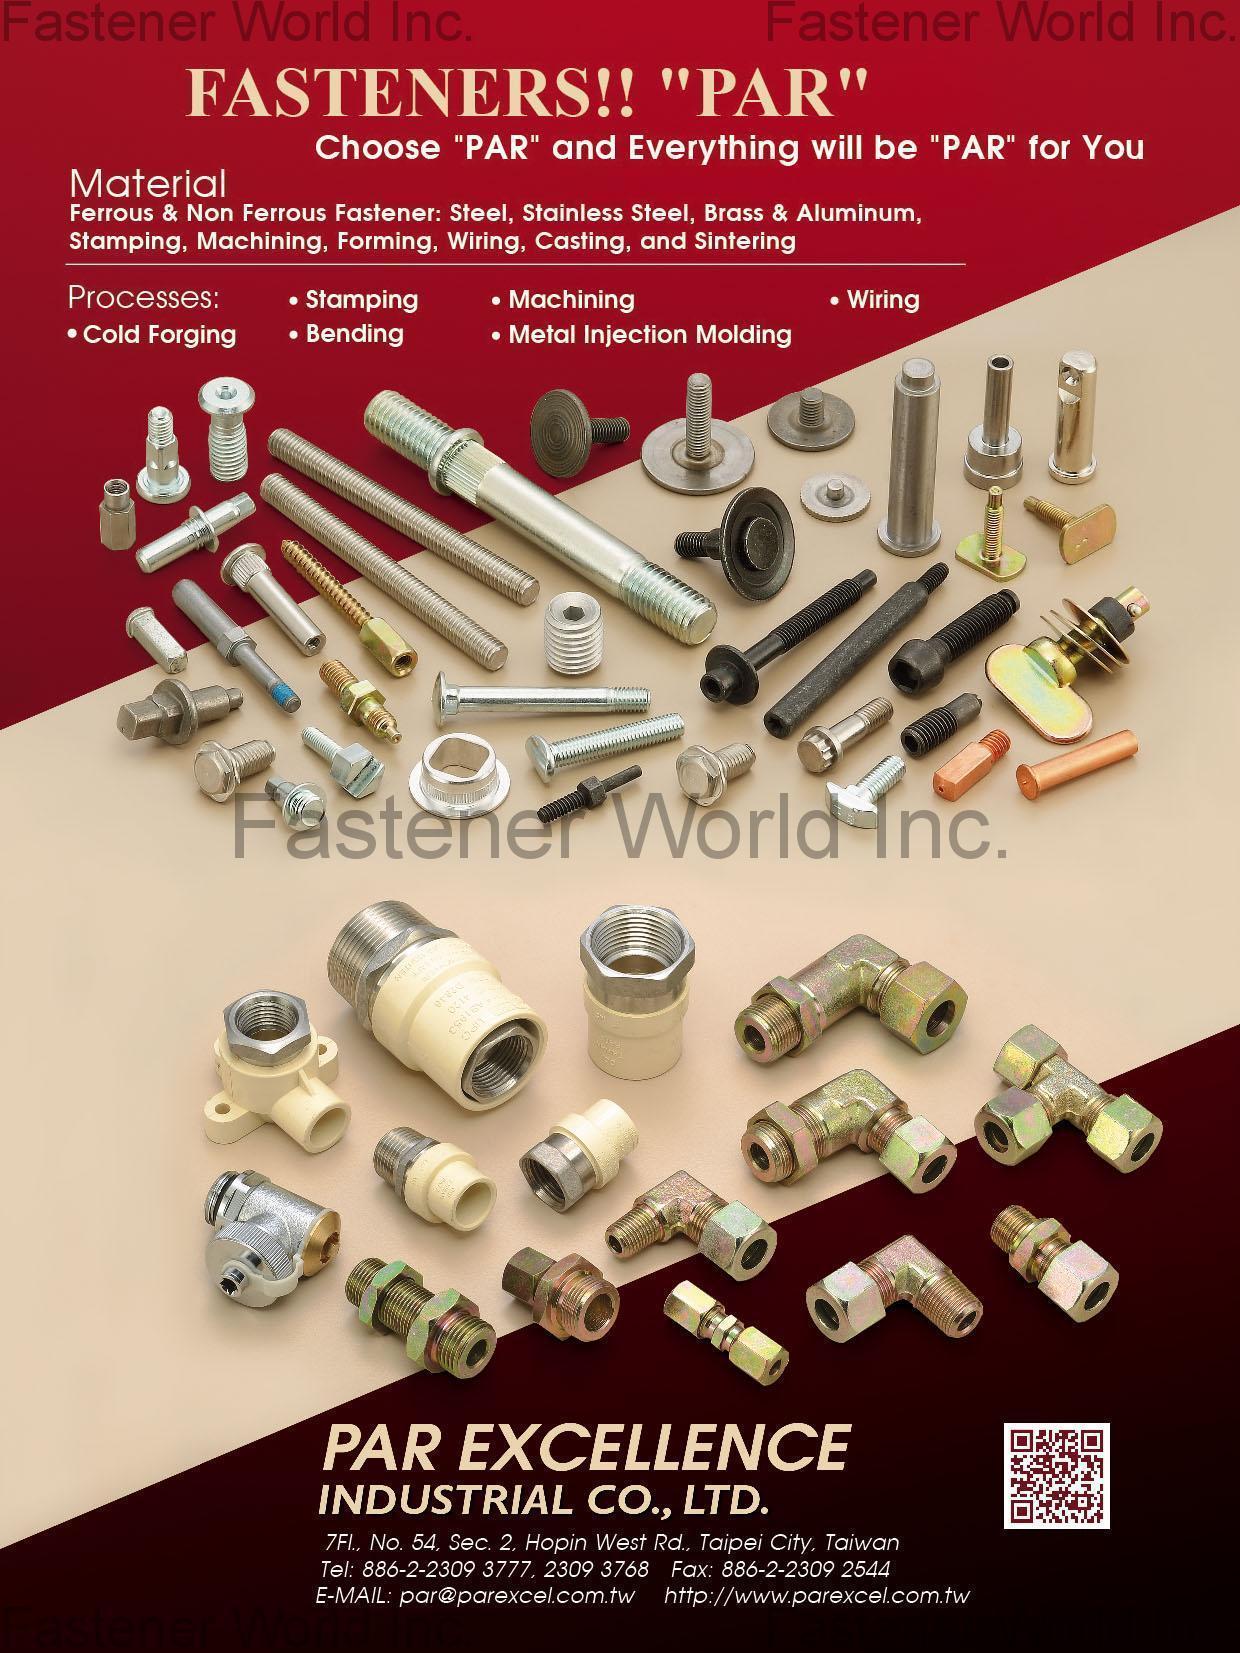 PAR EXCELLENCE INDUSTRIAL CO., LTD.  , Cold Forging, Stamping, Bending, Machining, Metal Injection Molding, Wiring , Stamped Parts